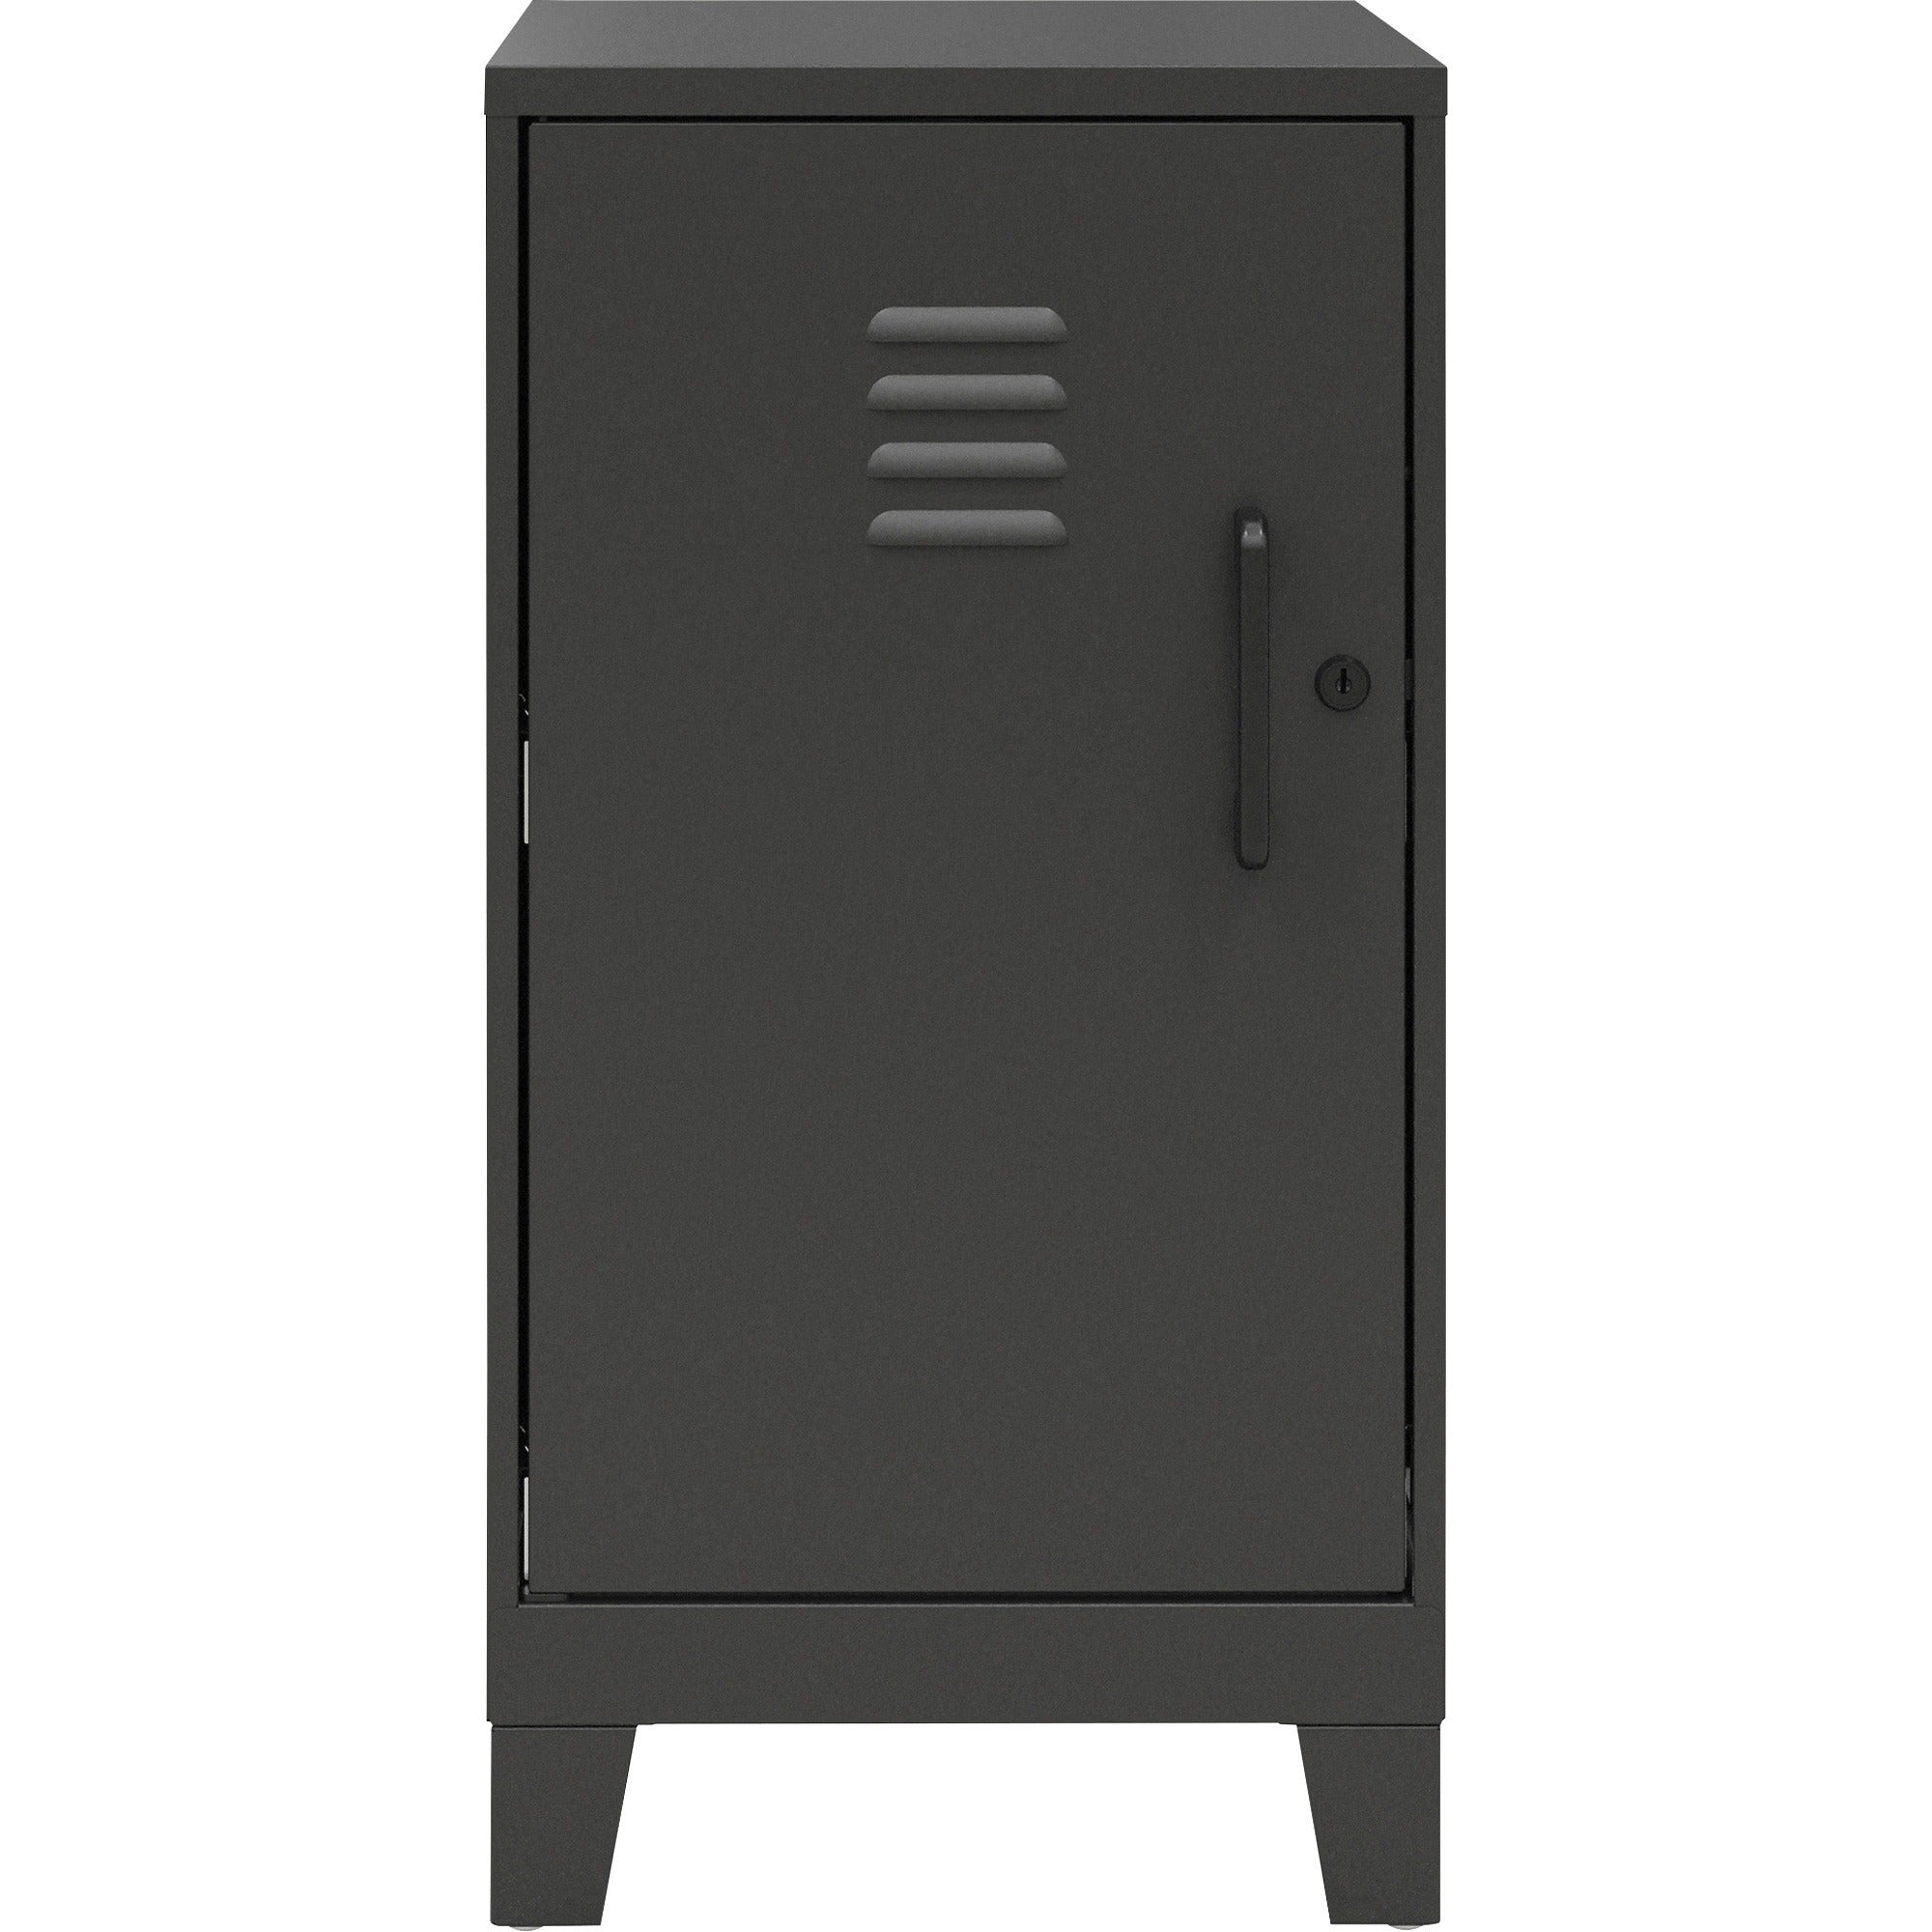 nusparc-personal-locker-2-shelves-for-office-home-sport-equipments-toy-game-classroom-playroom-basement-garage-overall-size-275-x-142-x-18-black-steel-taa-compliant_nprsl218zzbk - 2